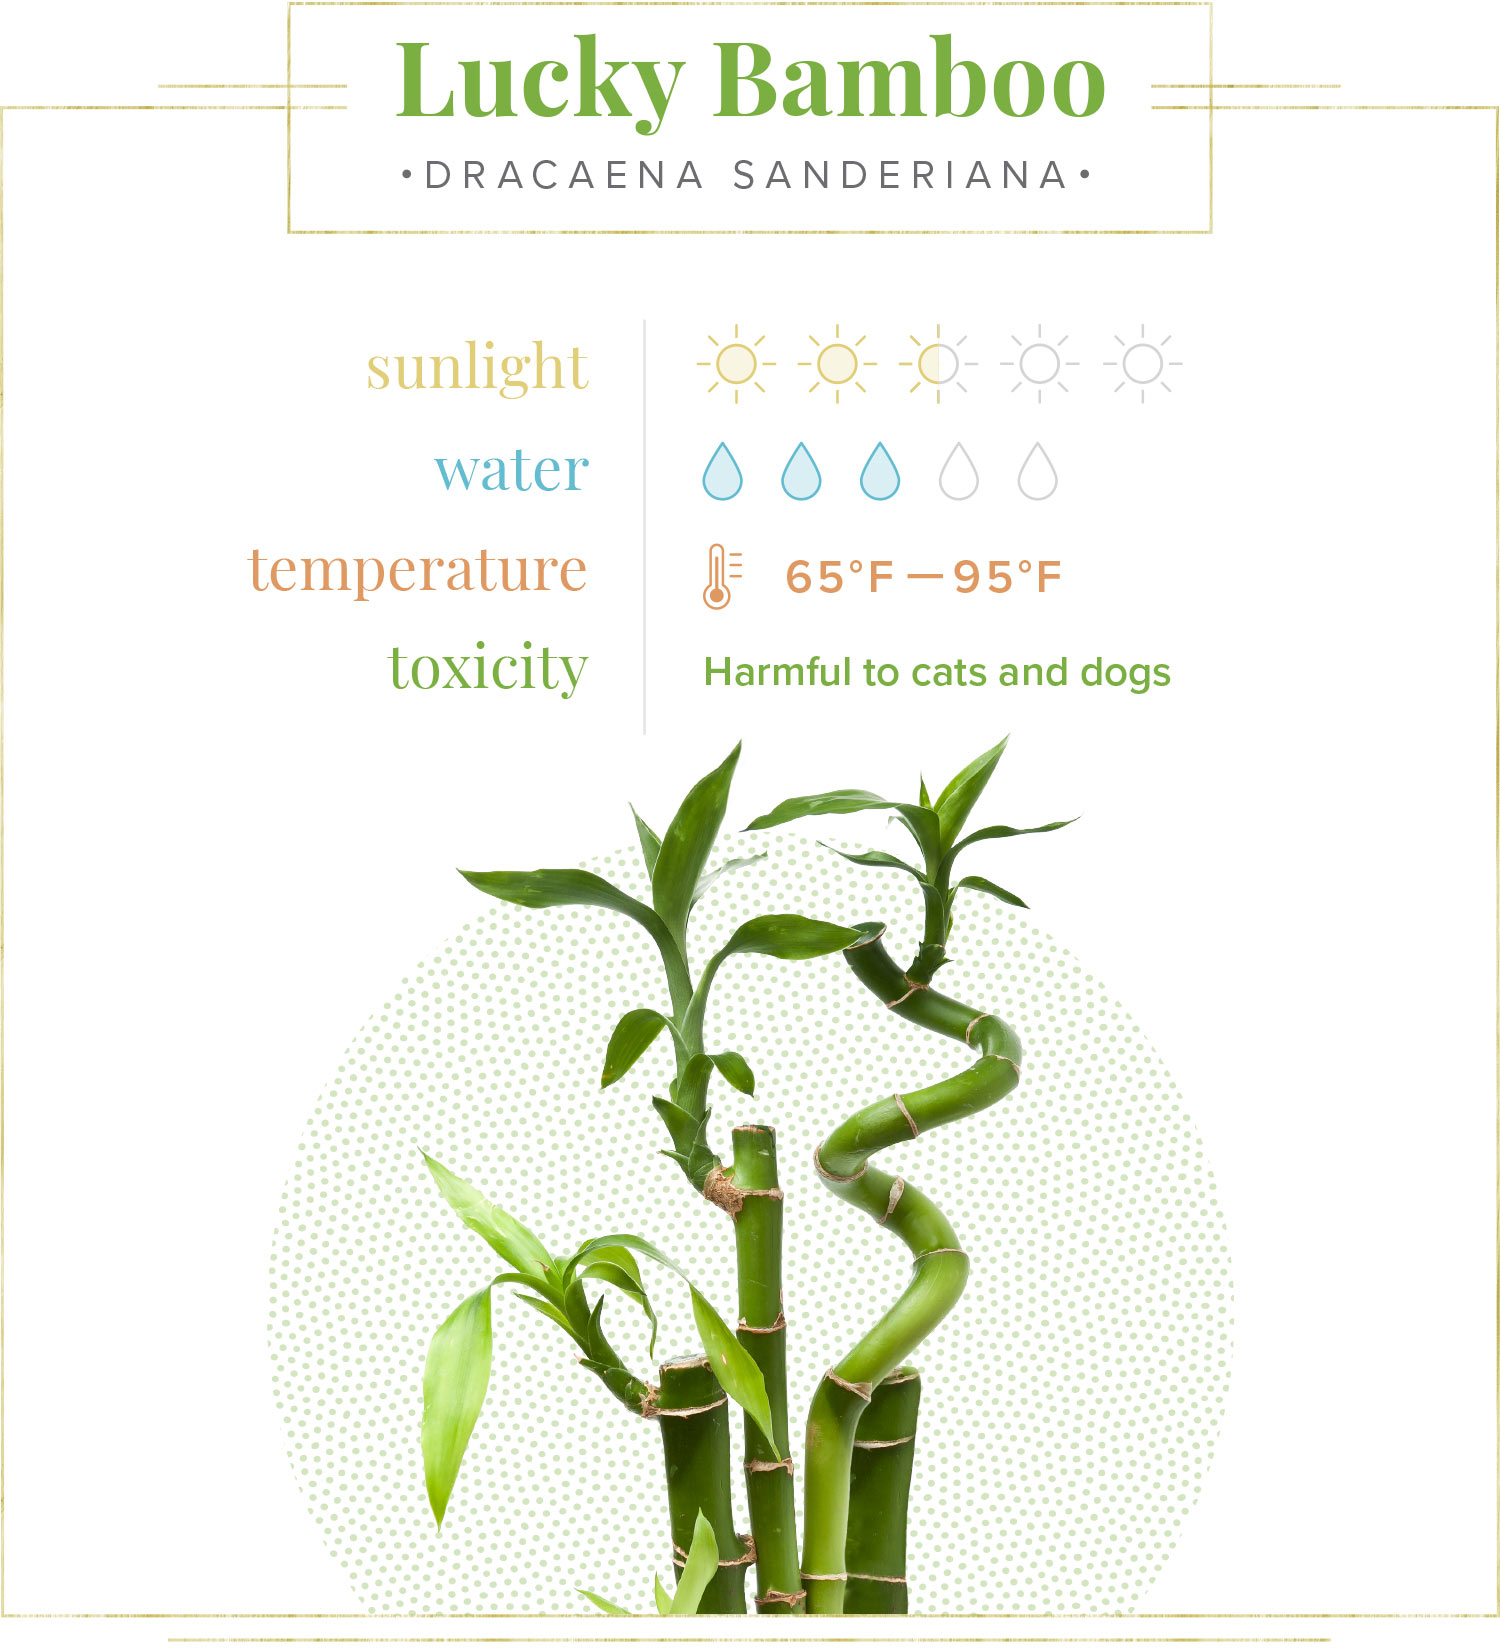 lucky bamboo (Dracaena sanderiana) - 2.5 suns out of 5. three water drops out of five, temperature 65–95 degrees farenheit. toxicity: harmful to cats and dogs